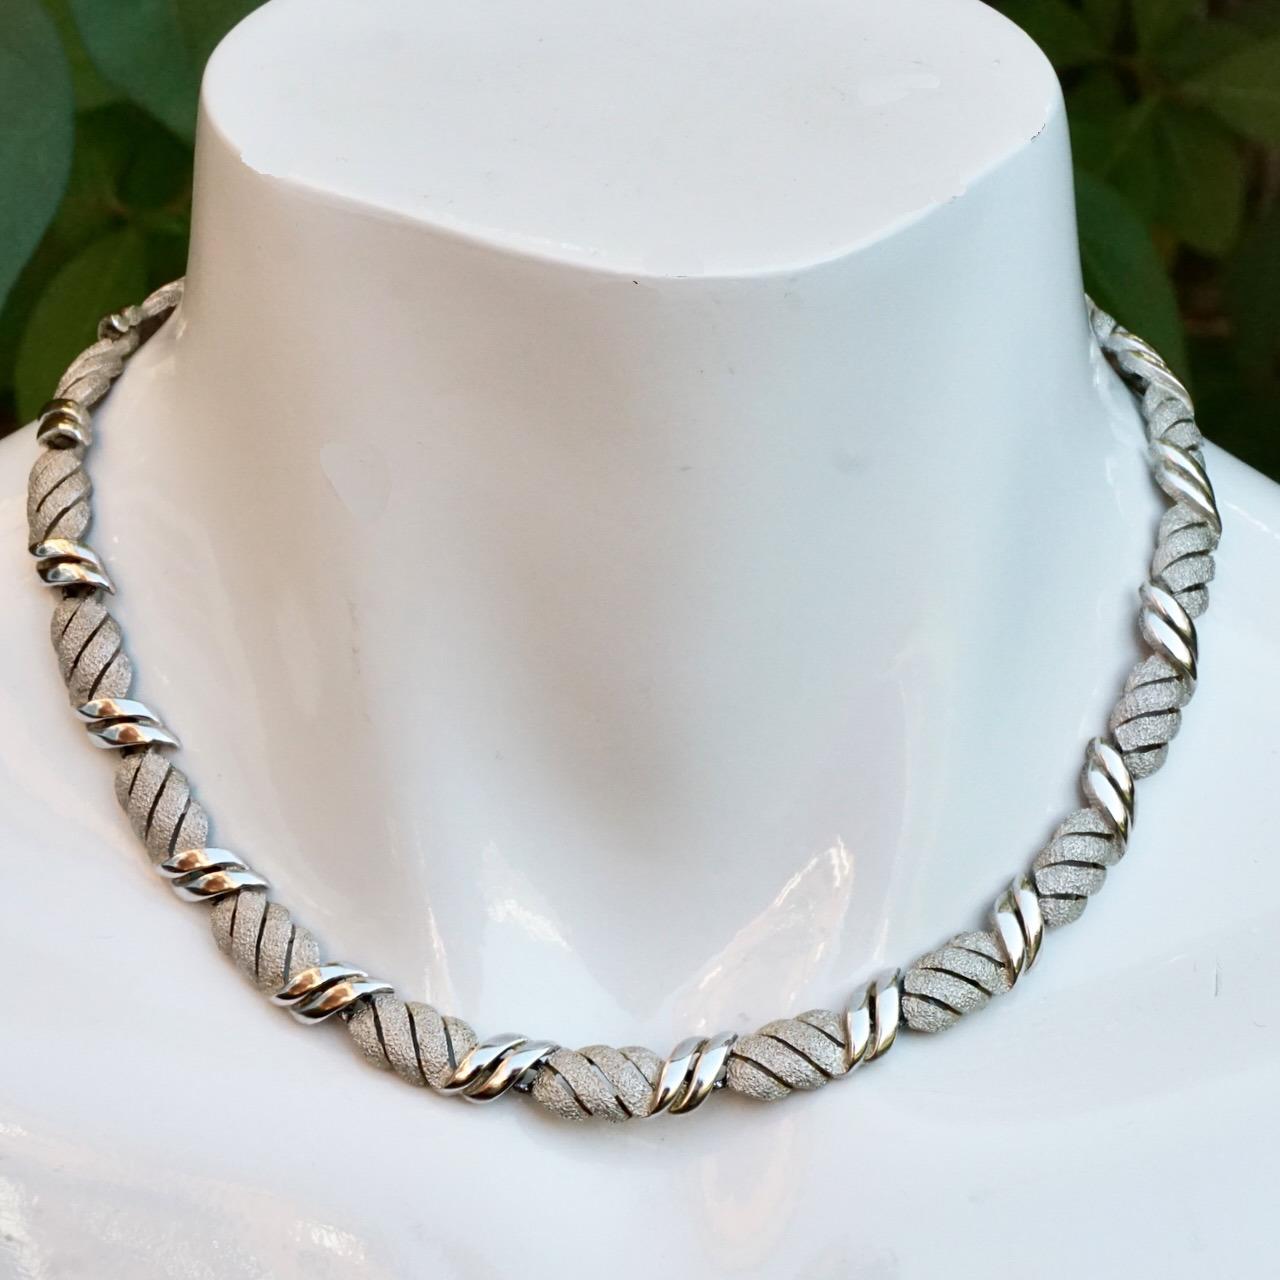 Beautiful Trifari silver plated brushed and shiny link design necklace. Length 39.7 cm / 15.6 inches by width 8 mm / .3 inch. The necklace has a double link clasp, allowing a link to be removed to make the necklace shorter. The necklace is in very